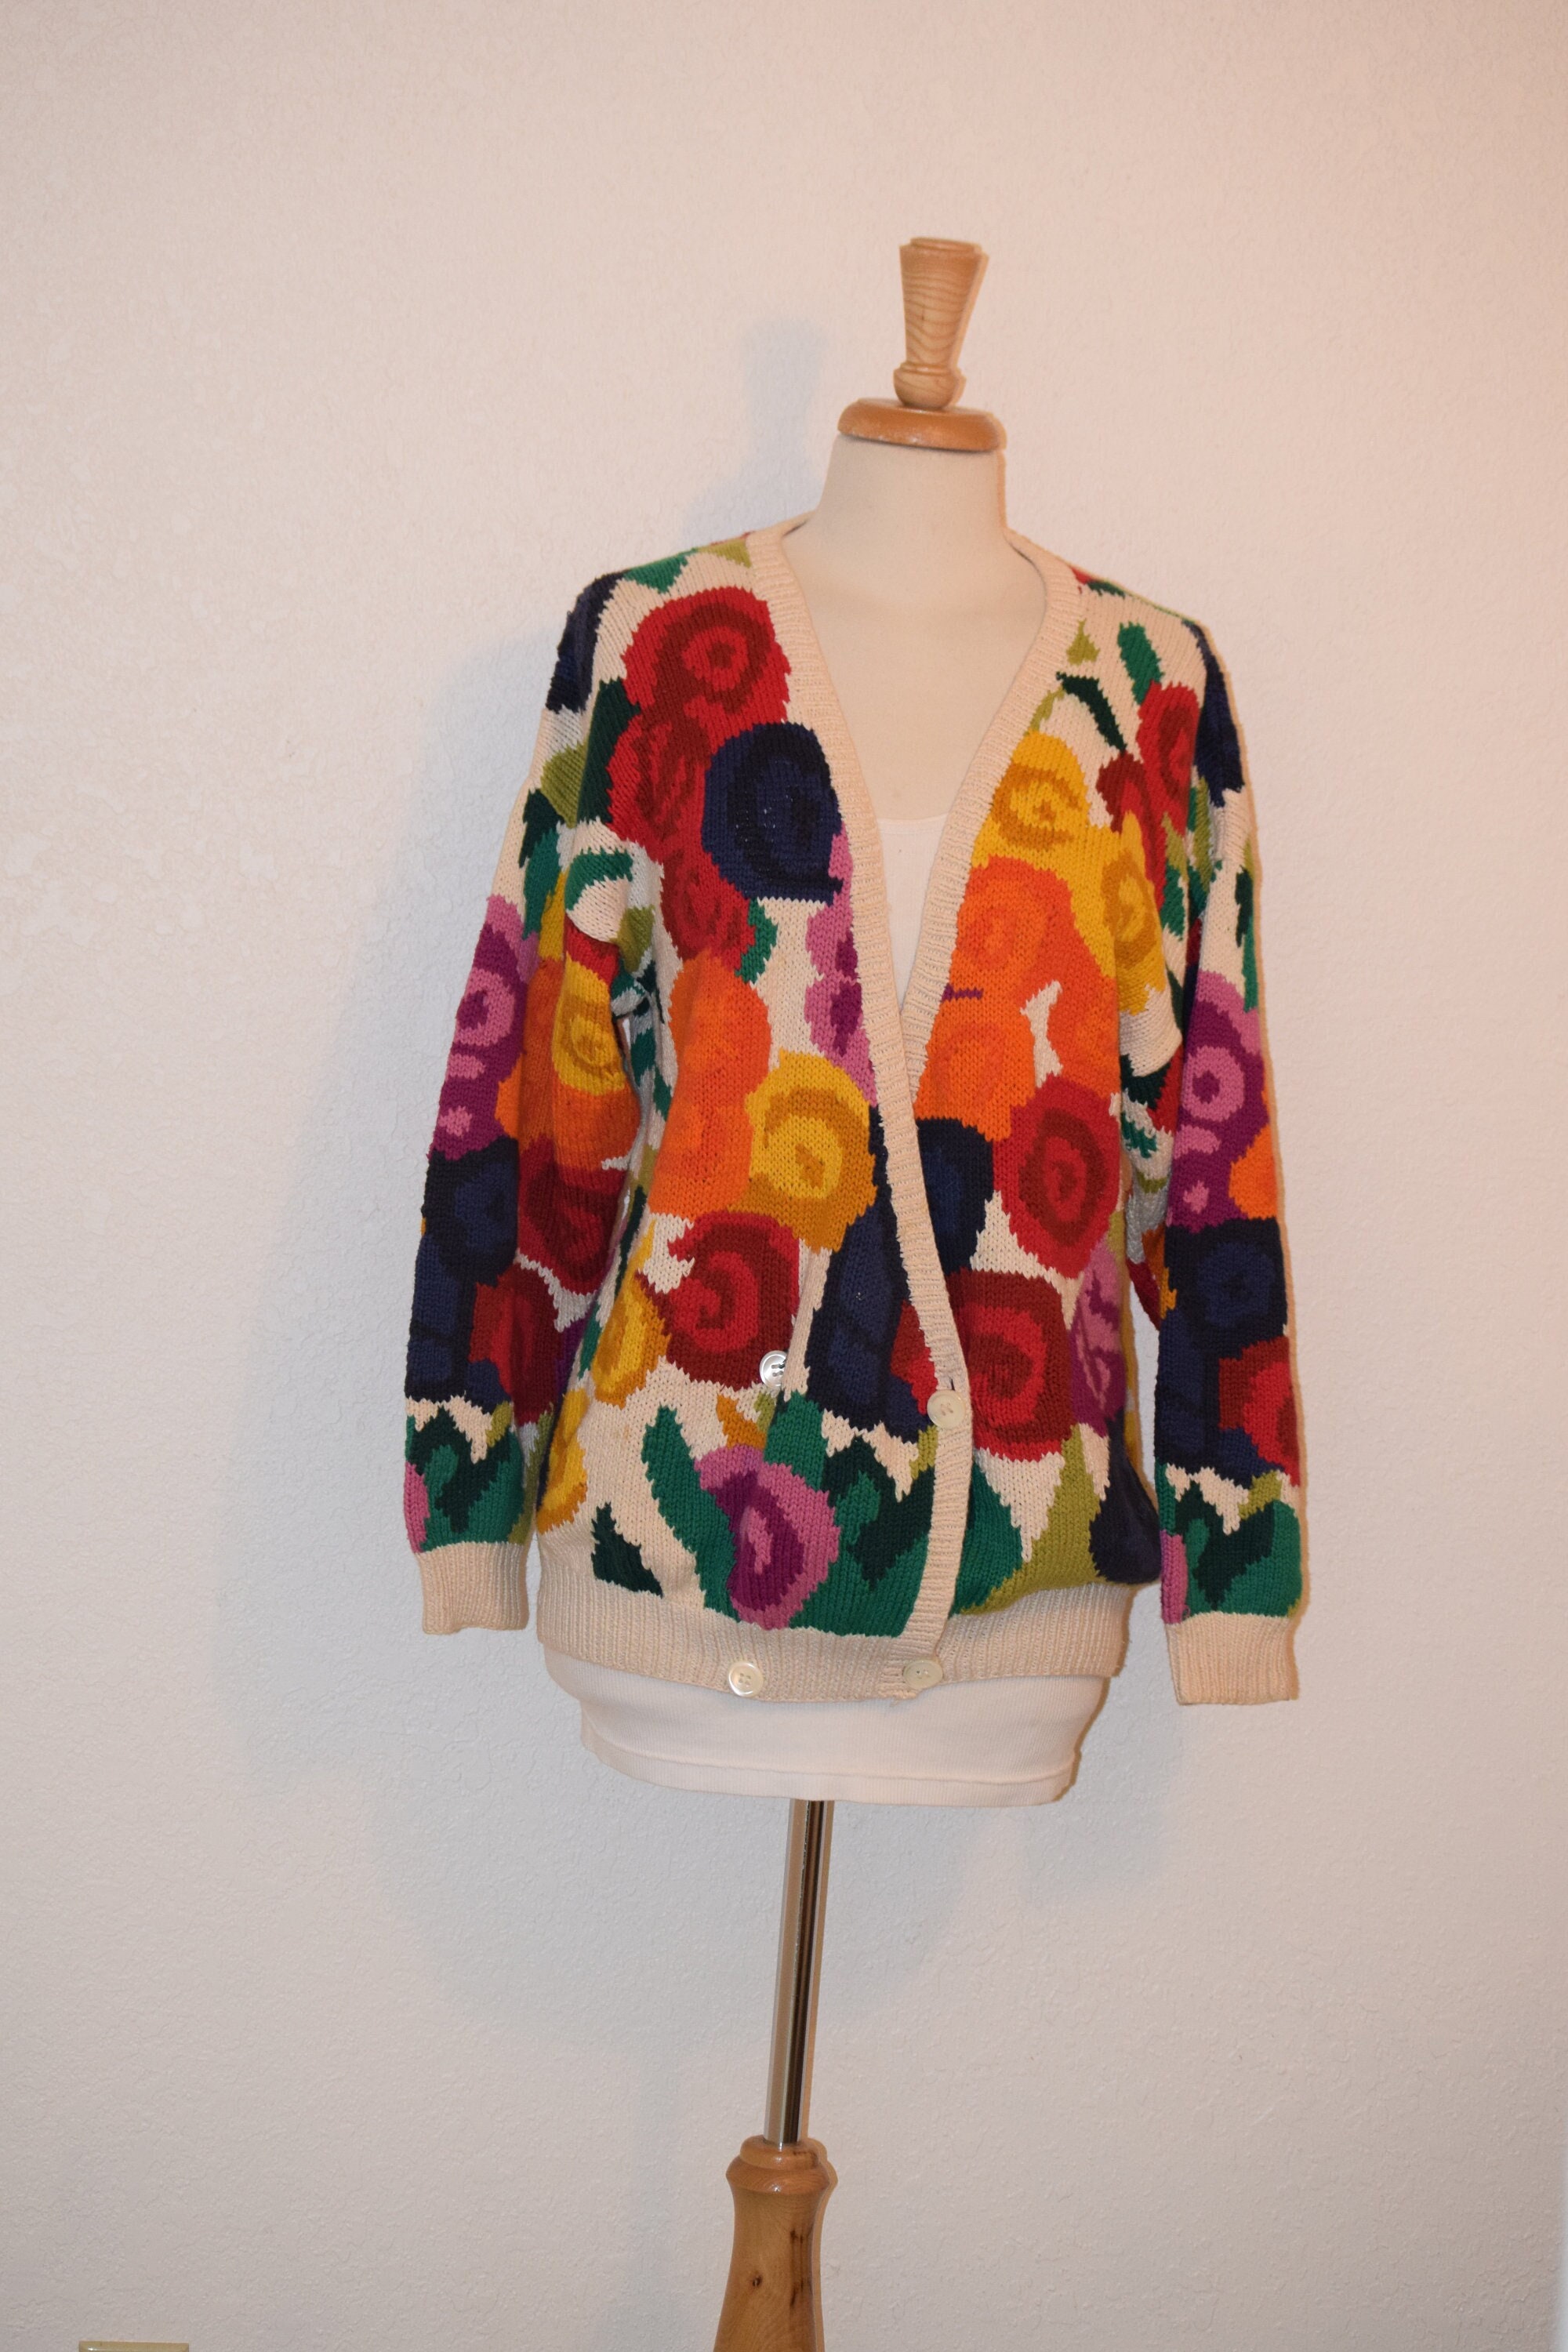 Bright Jewel Toned Floral 'Perry Ellis' 90's 1990's Hand Knit Oversize Slouchy Low Button Double Breasted Sweater Cardigan Women's Medium